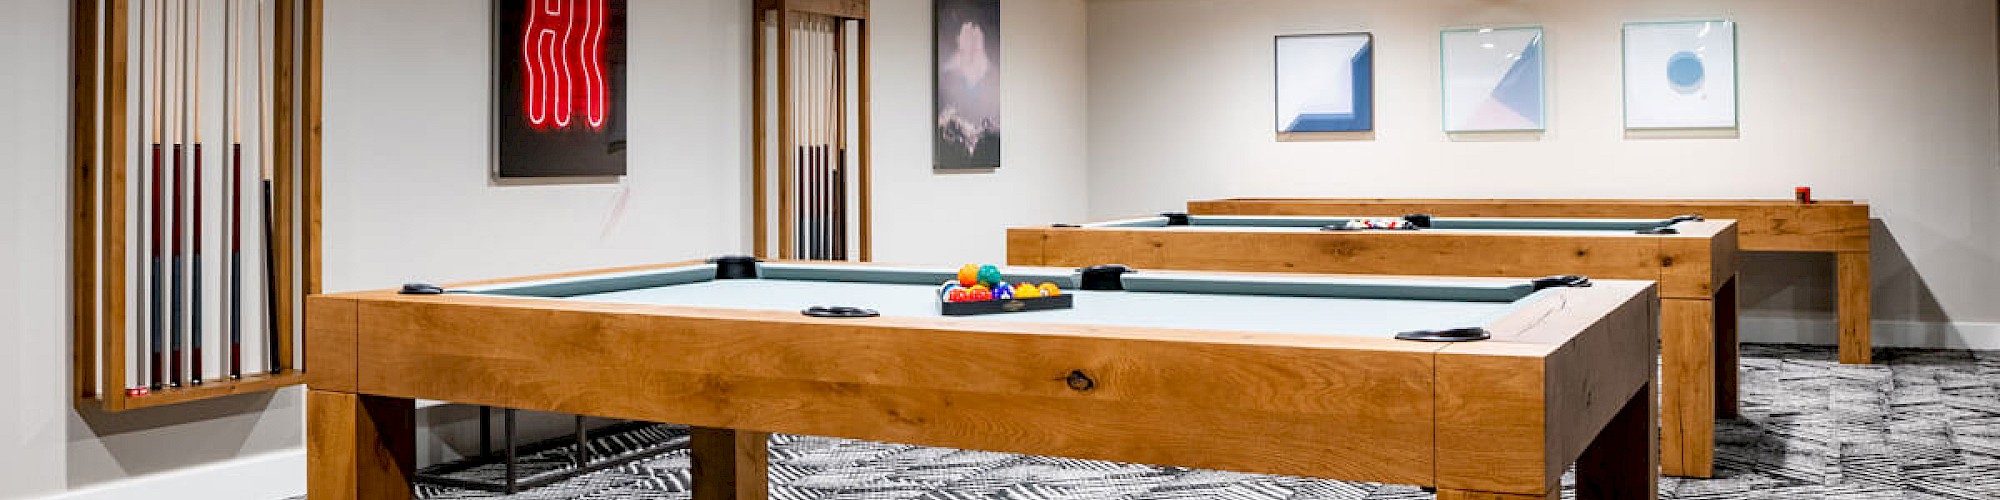 The image shows a modern room with multiple pool tables, framed artwork on the walls, and a patterned carpet.